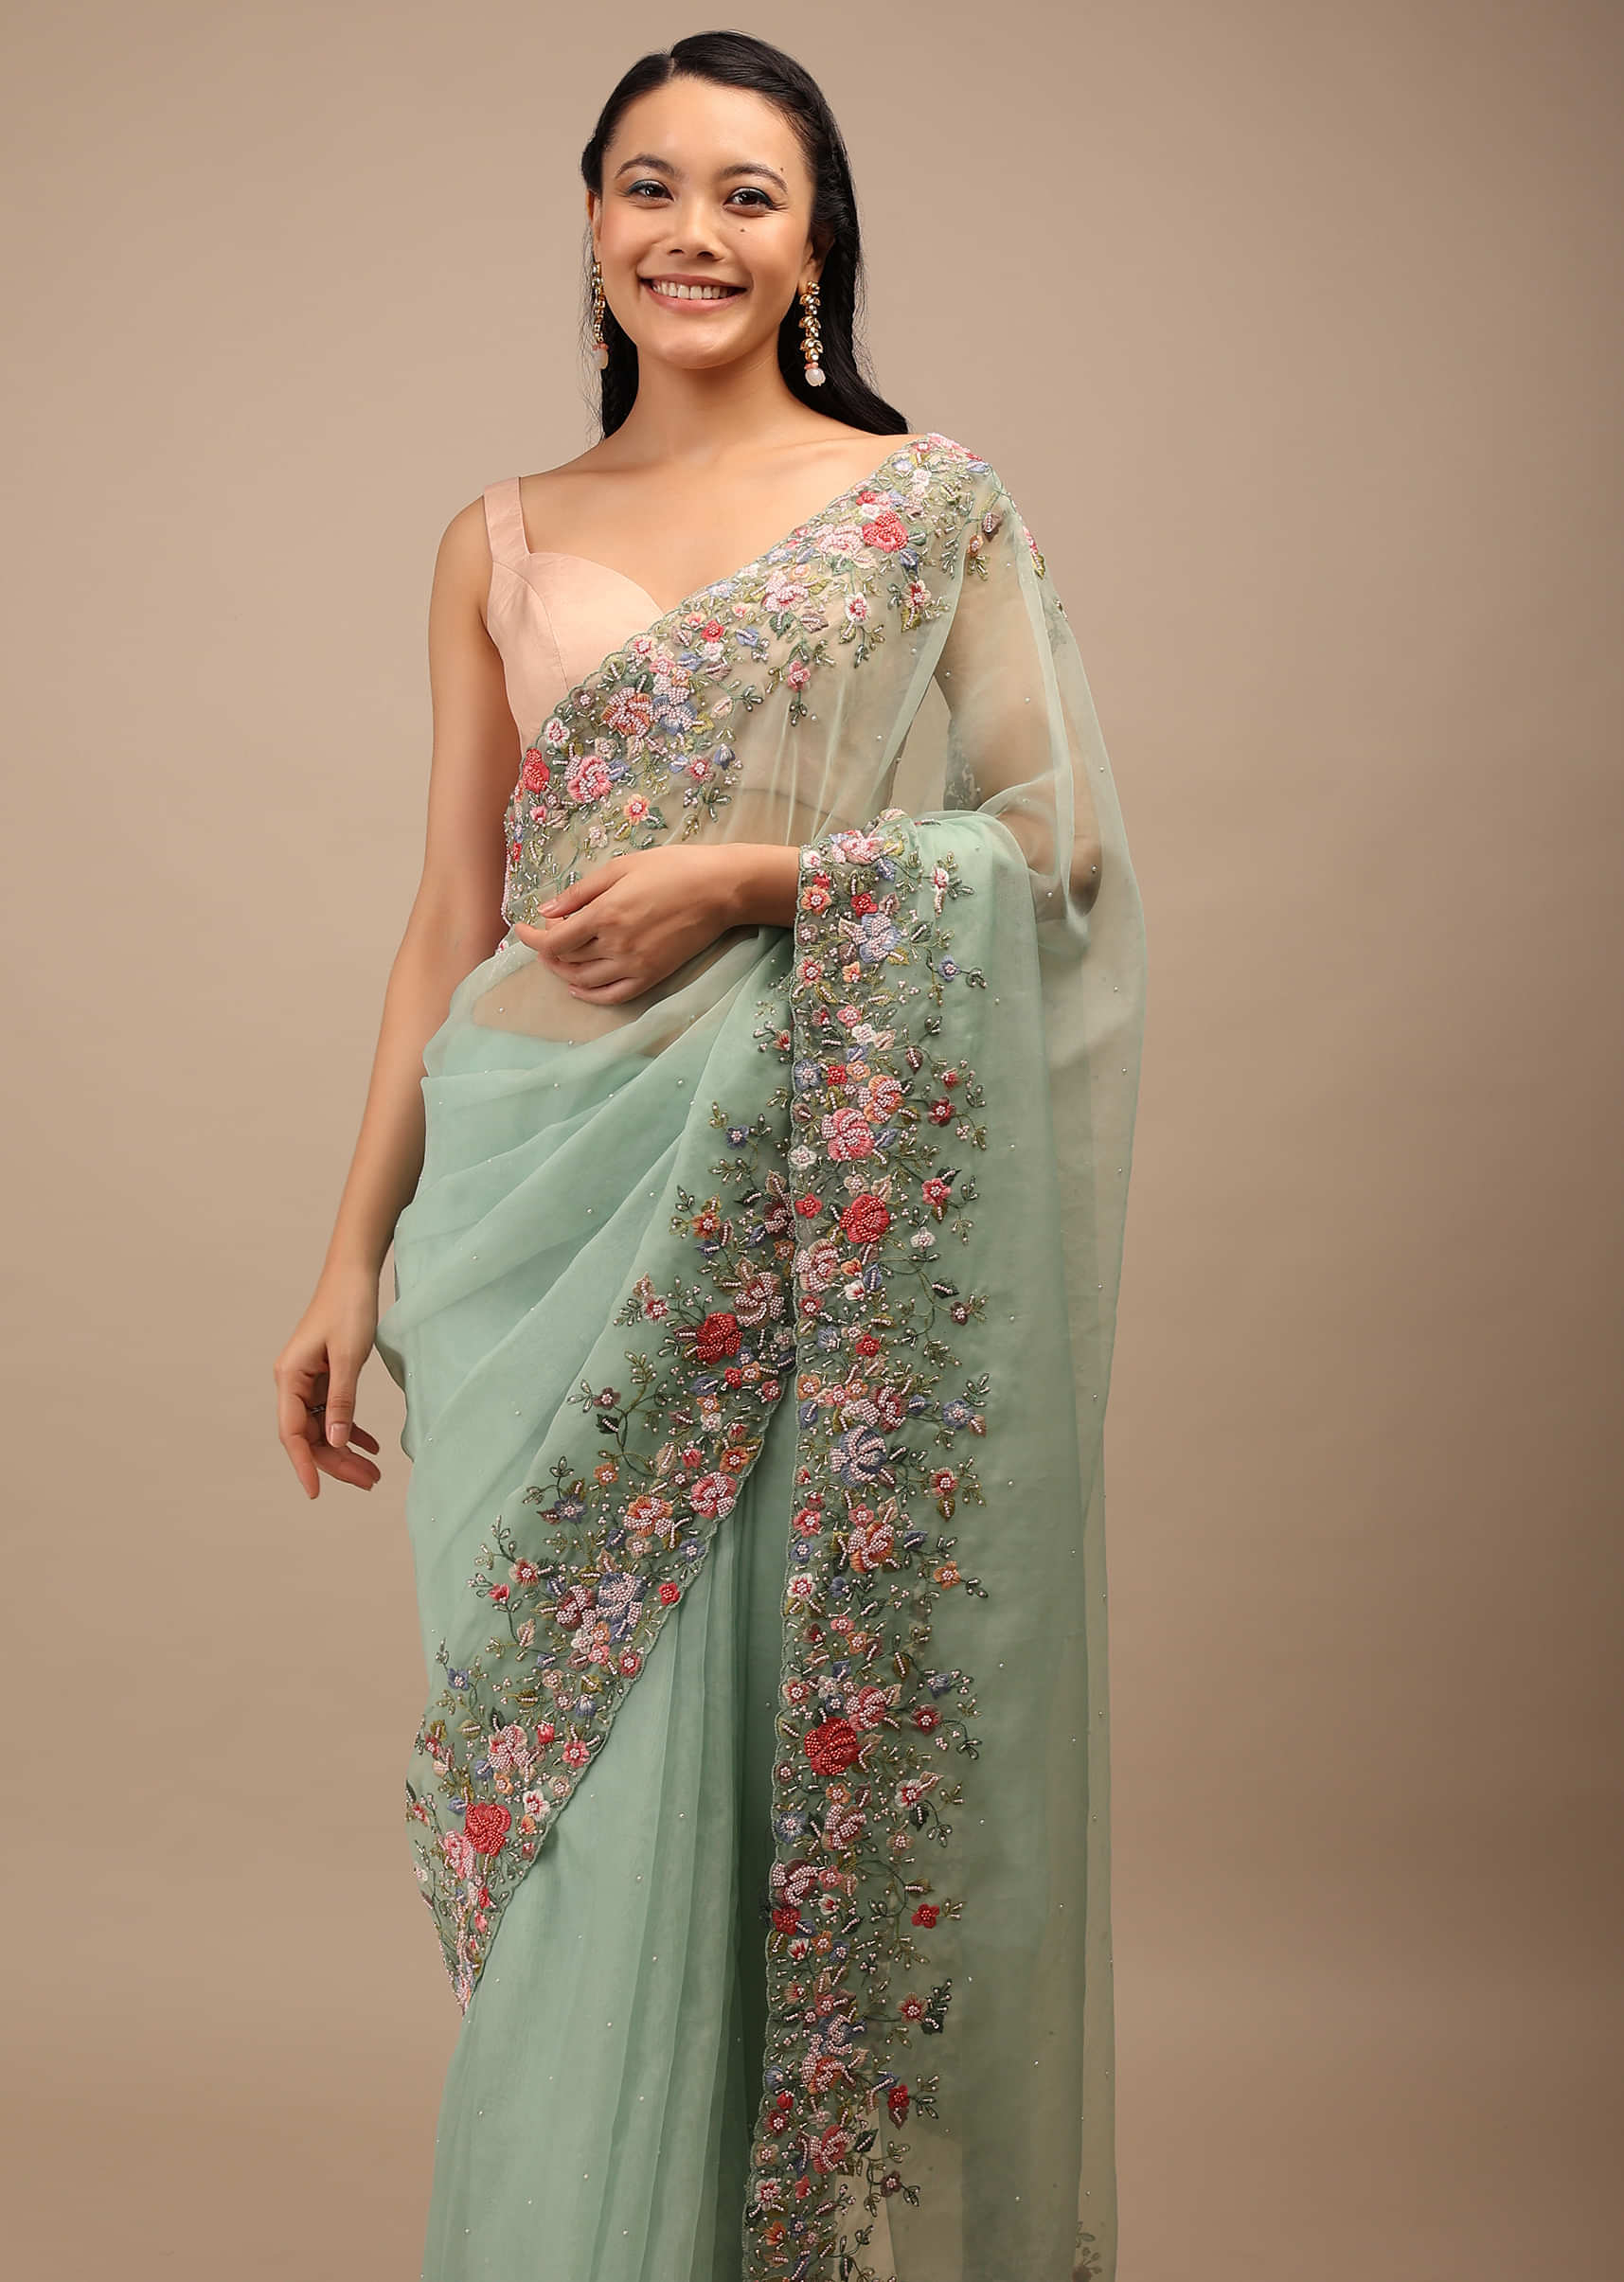 Mist Green Organza Saree In Multi-Color Resham Work Embroidery Detailing On The Border, 